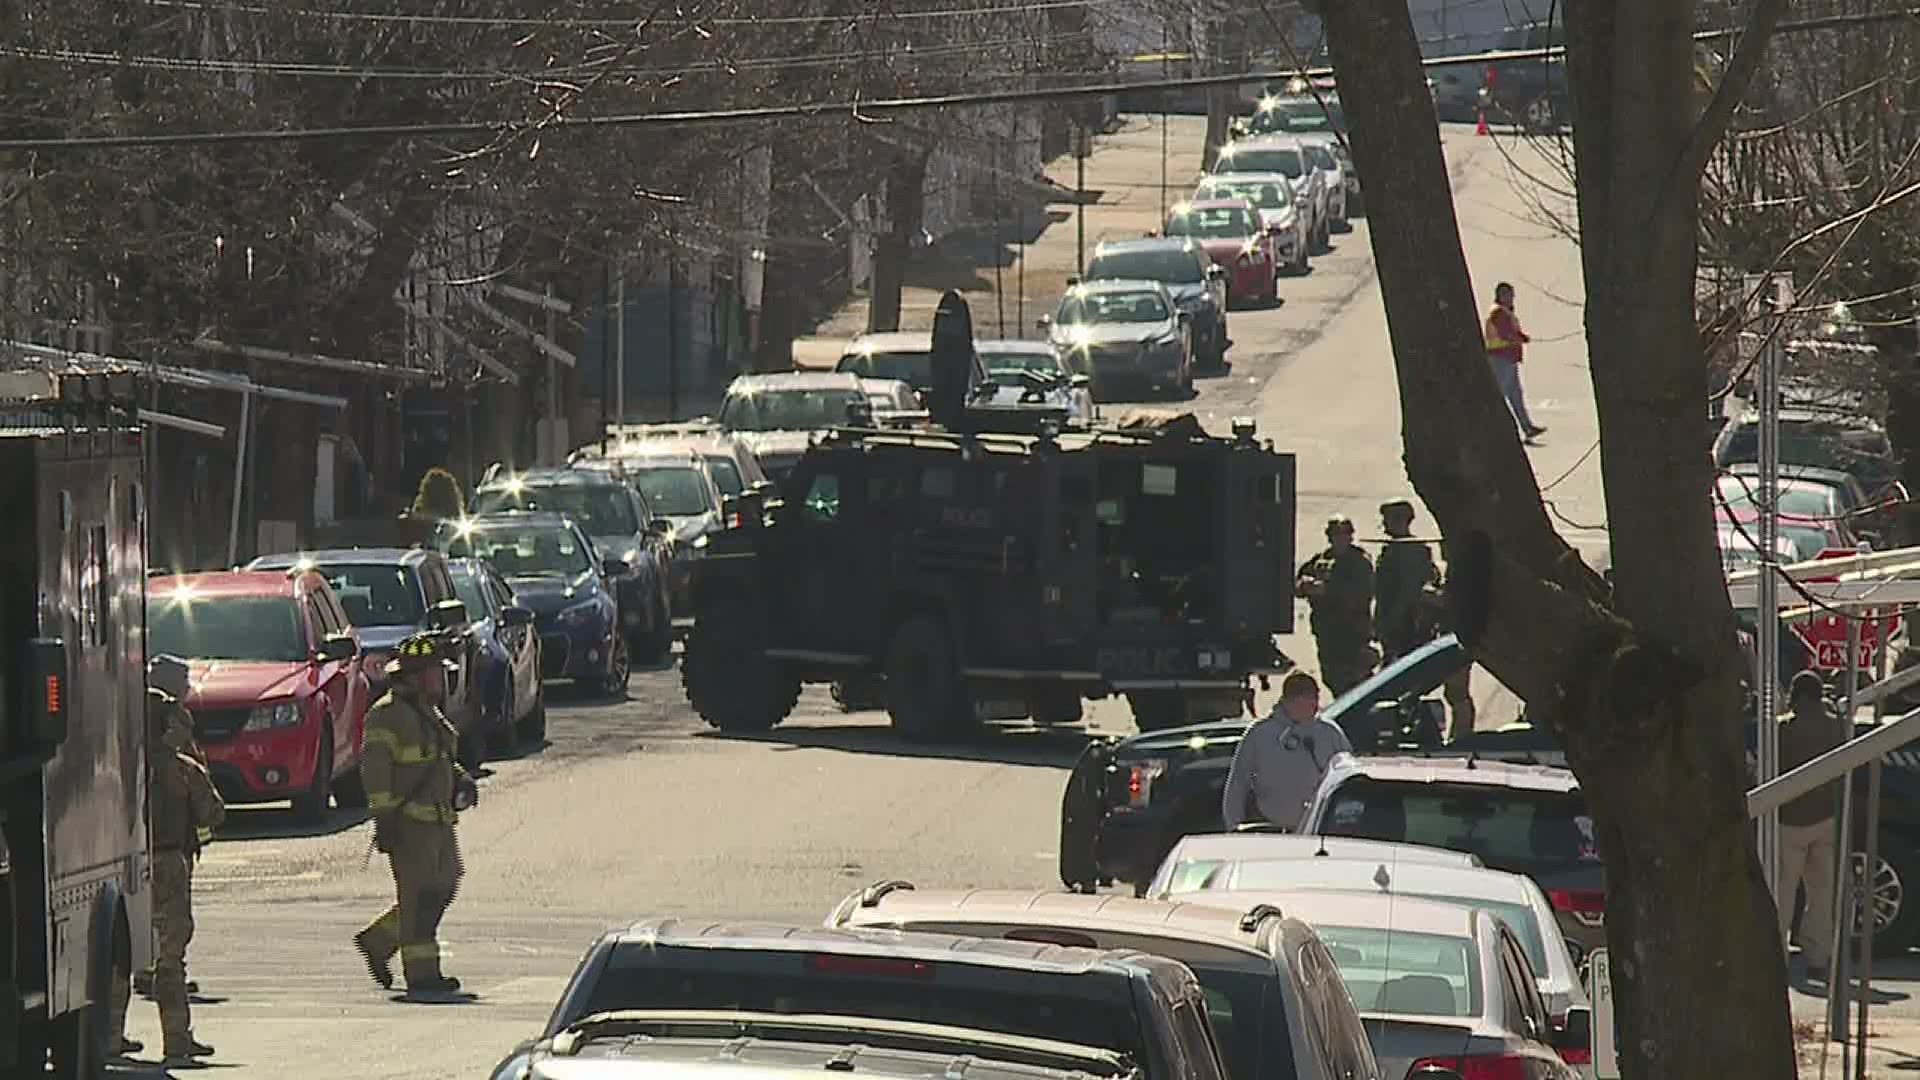 Police said the suspect refused to cooperate when swat teams surrounded the South Maple Street house.